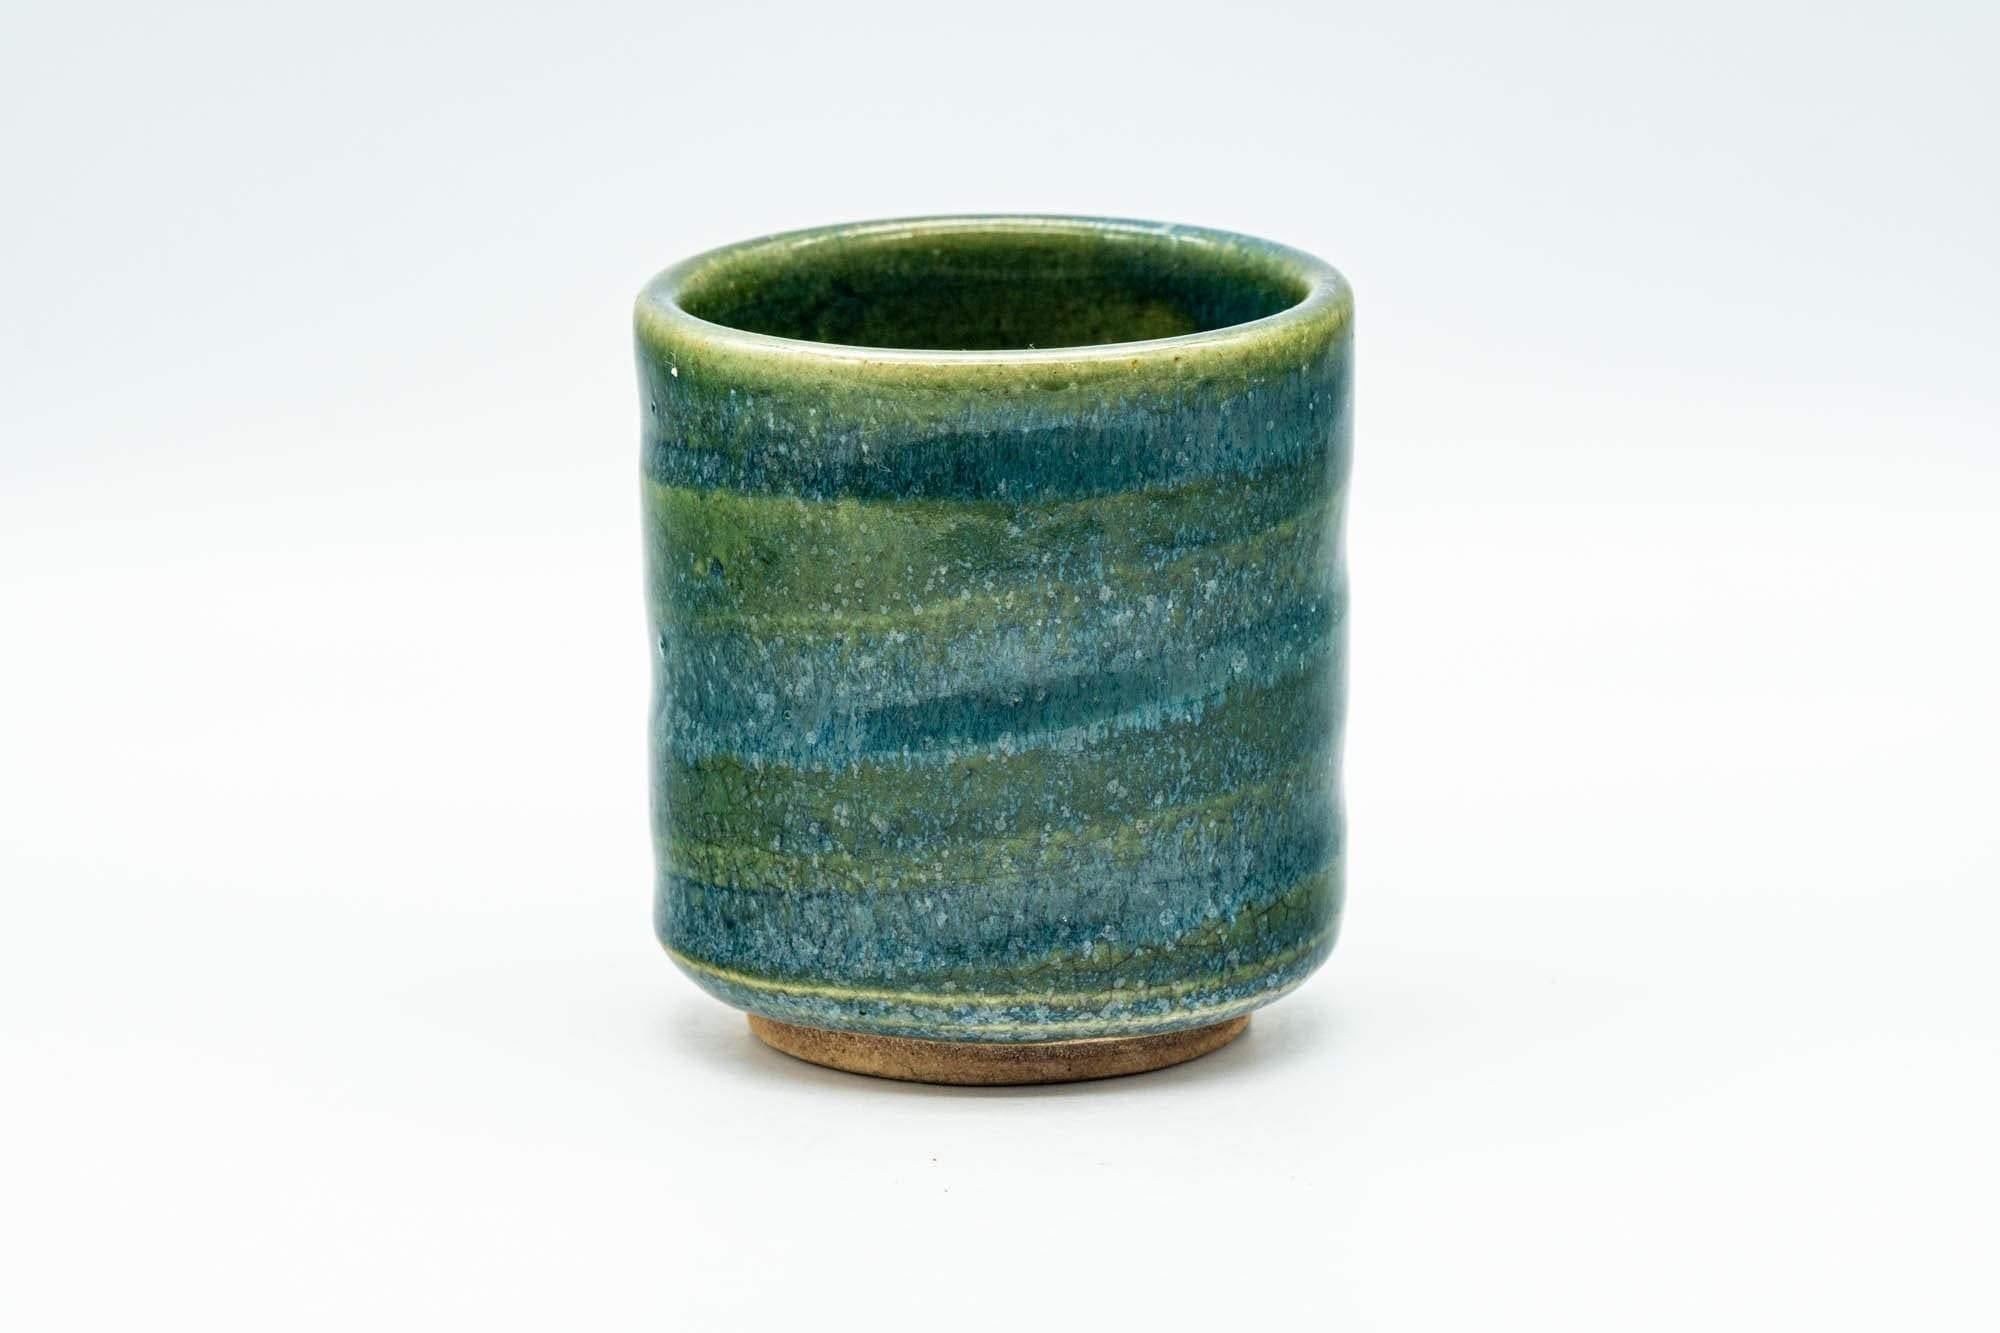 Japanese Teacup - Speckled Turquoise Green Glazed Yunomi - 140ml - Tezumi